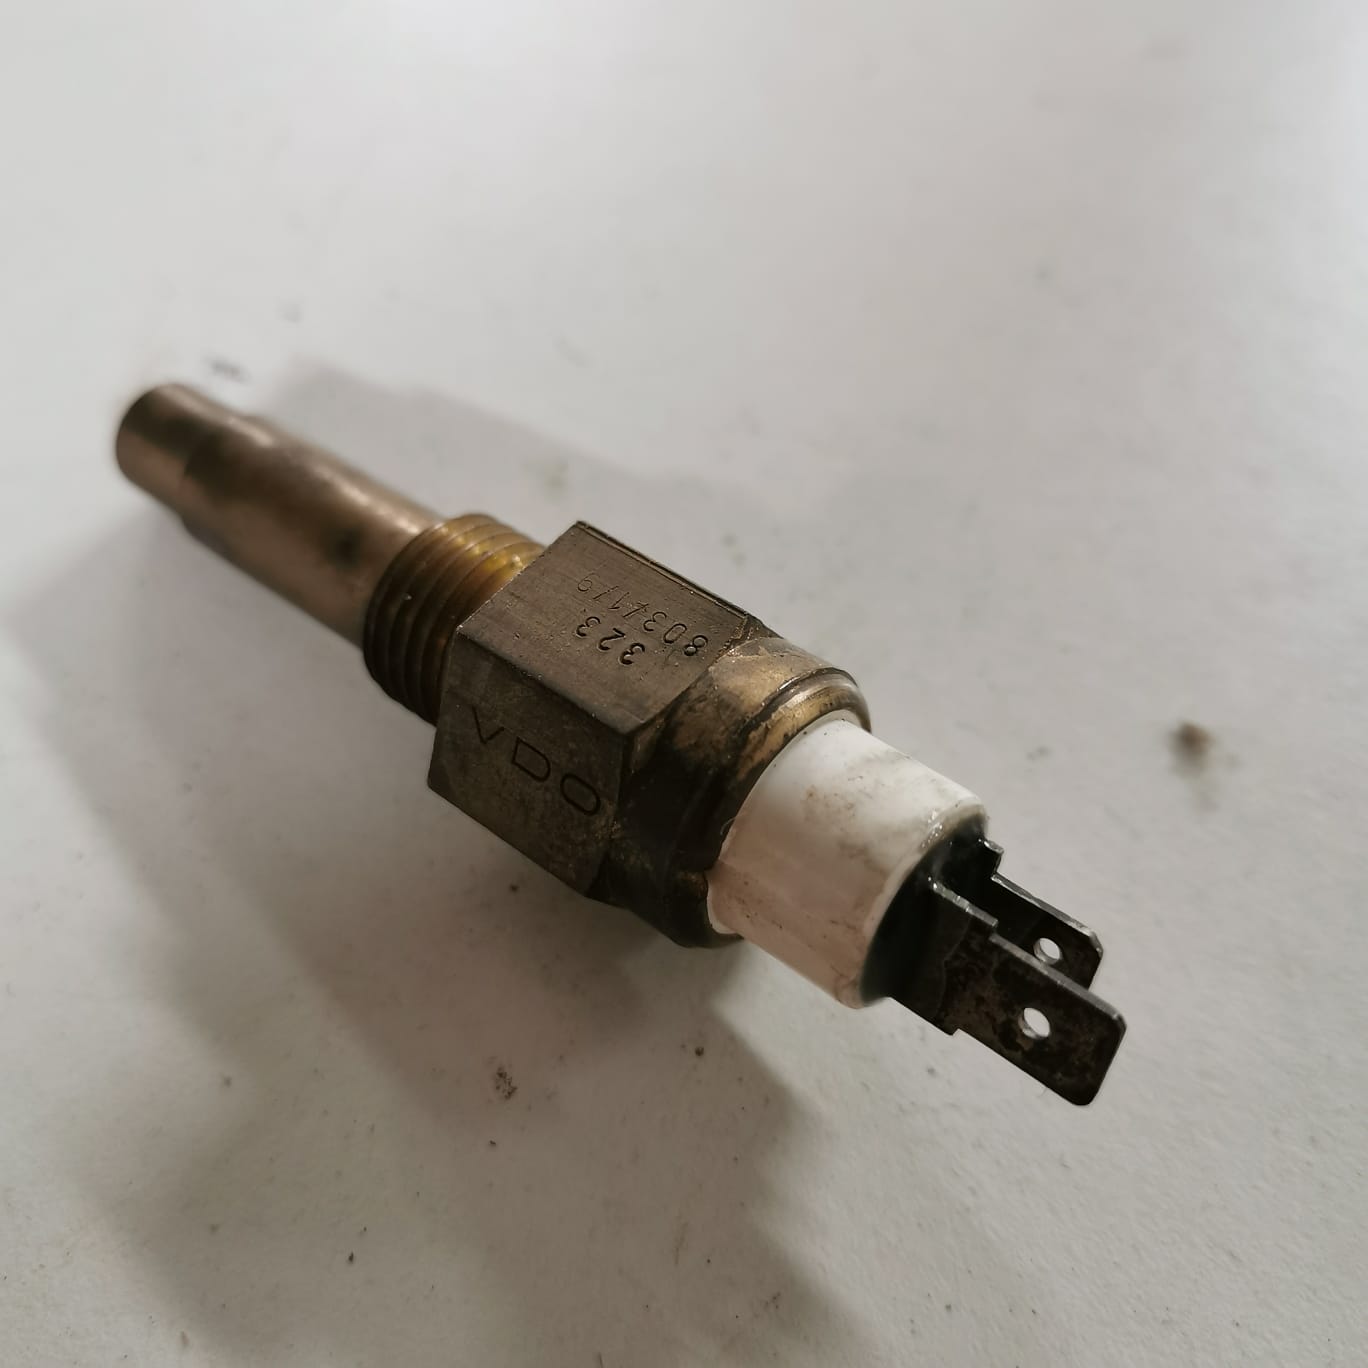 Temperature transmitter until 1970 (2 connections)